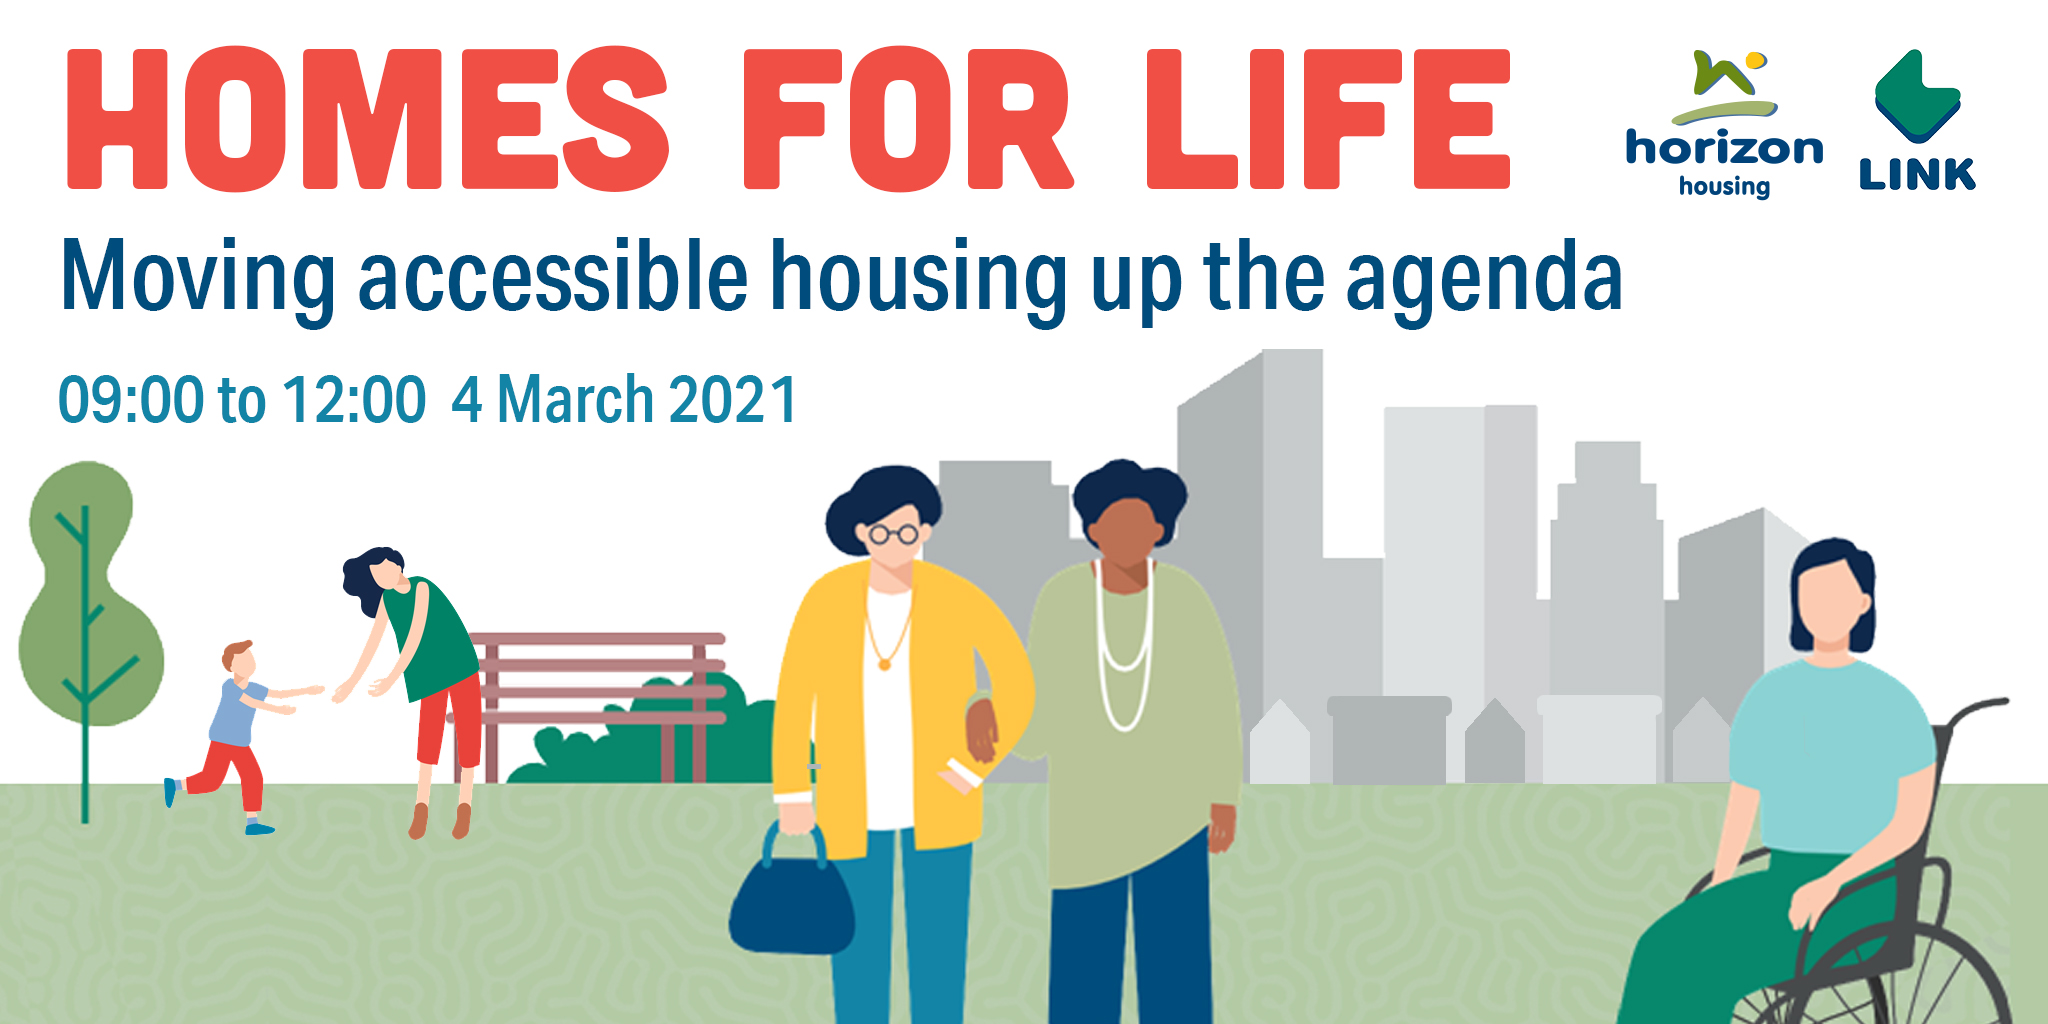 Housing minister to open accessible housing summit focused on homes for